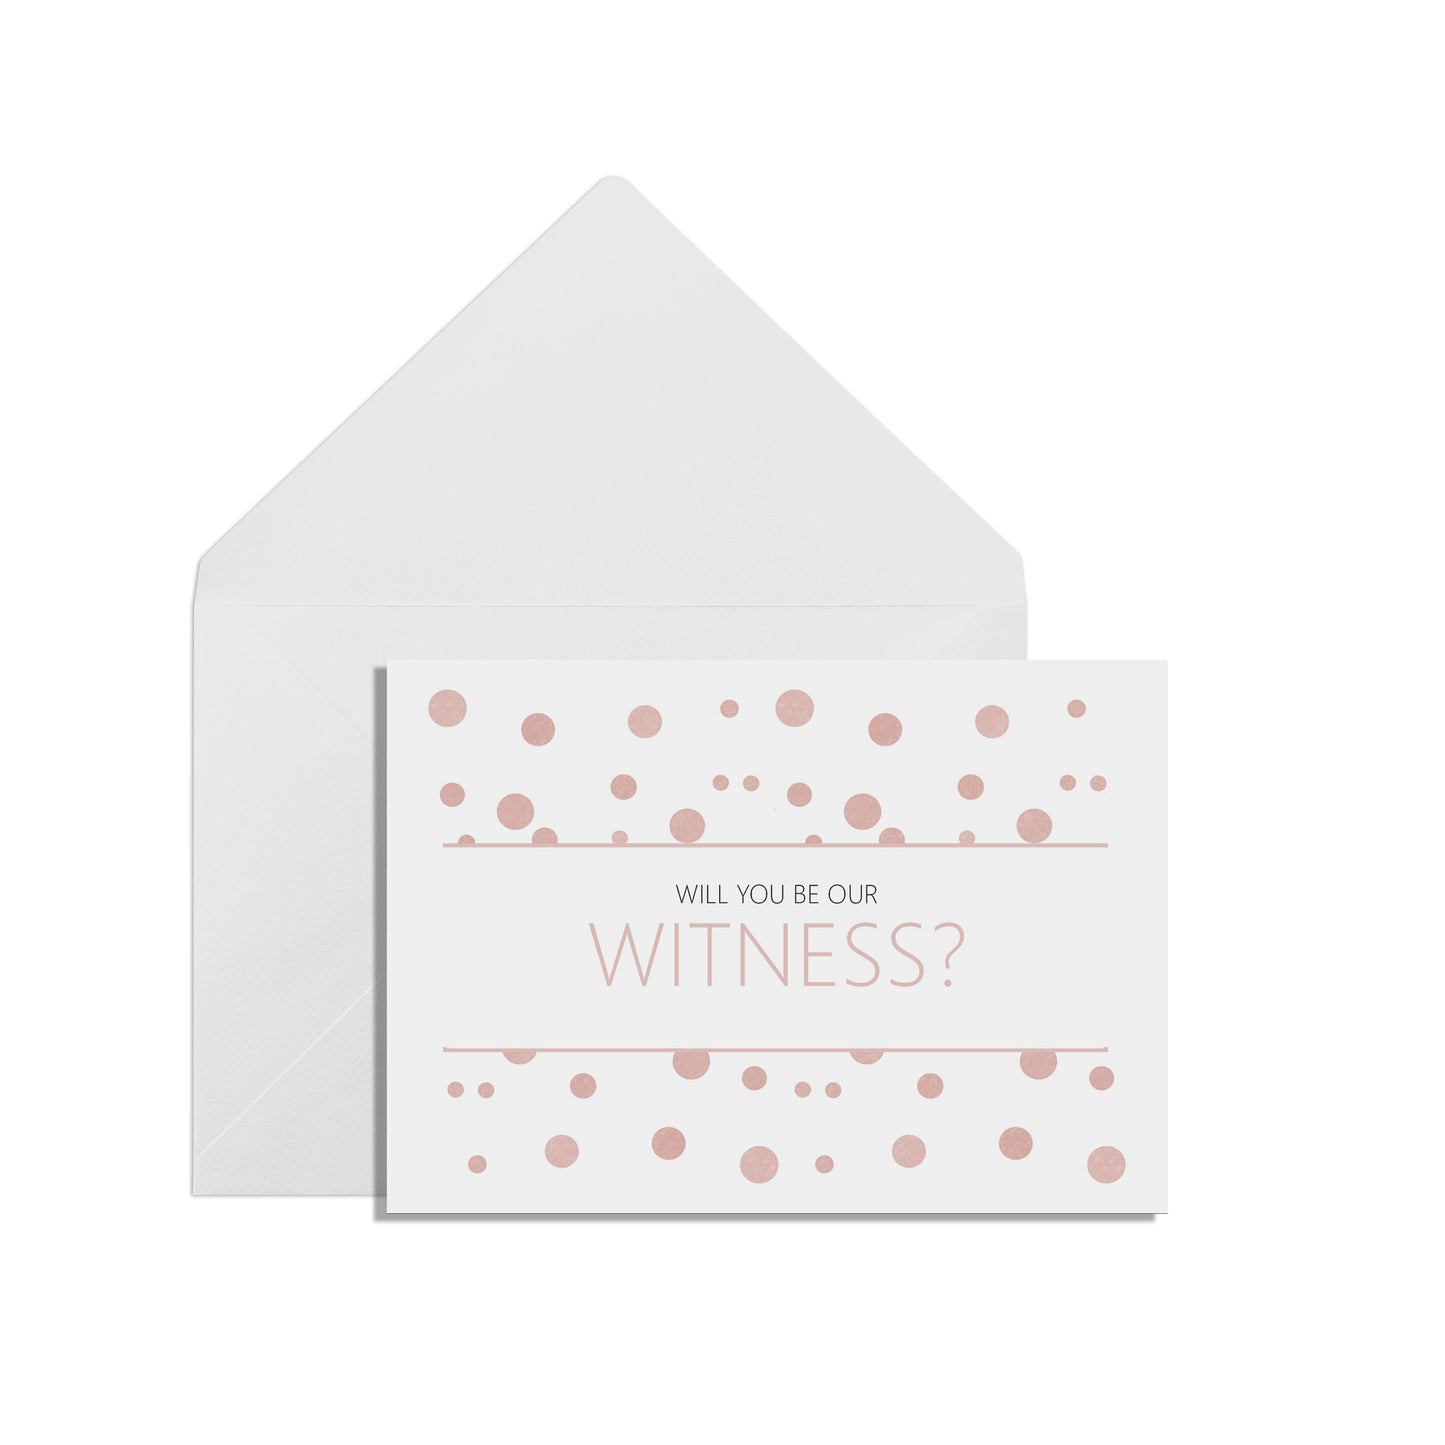 Will You Be Our Witness? A6 Blush Confetti Wedding Proposal Card With White Envelope